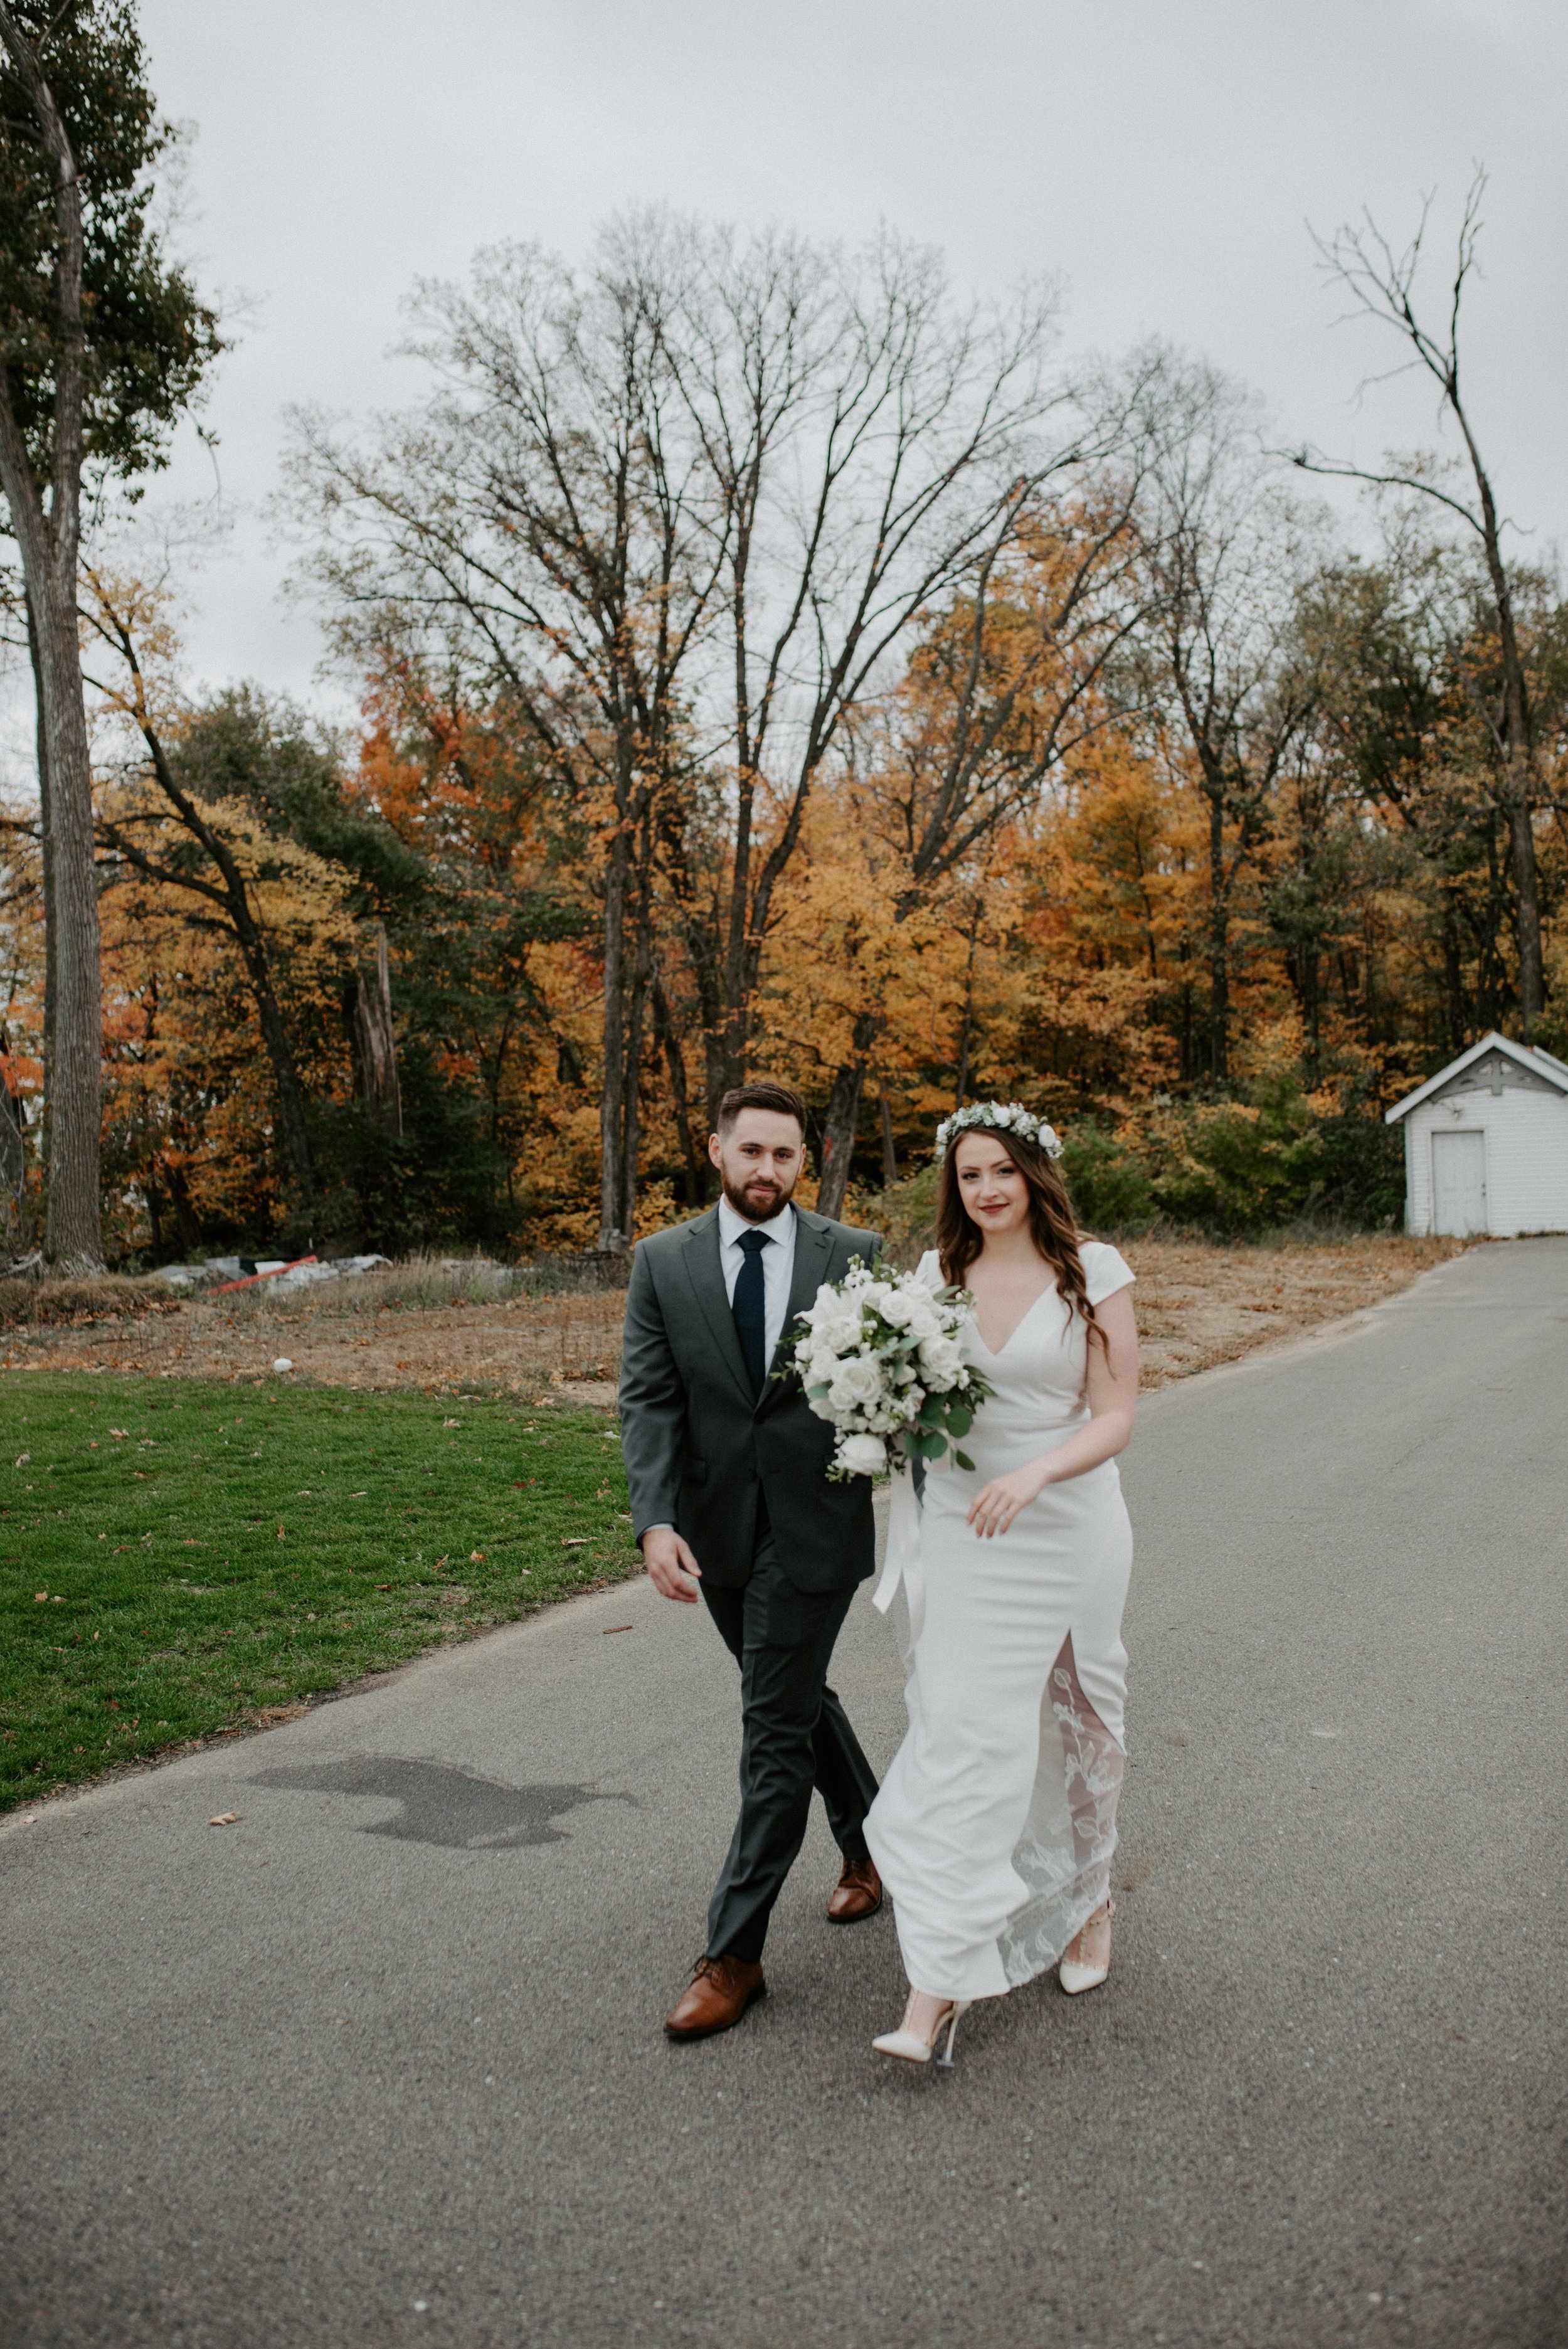 classic autumn wedding with the bride and groom walking down the street 